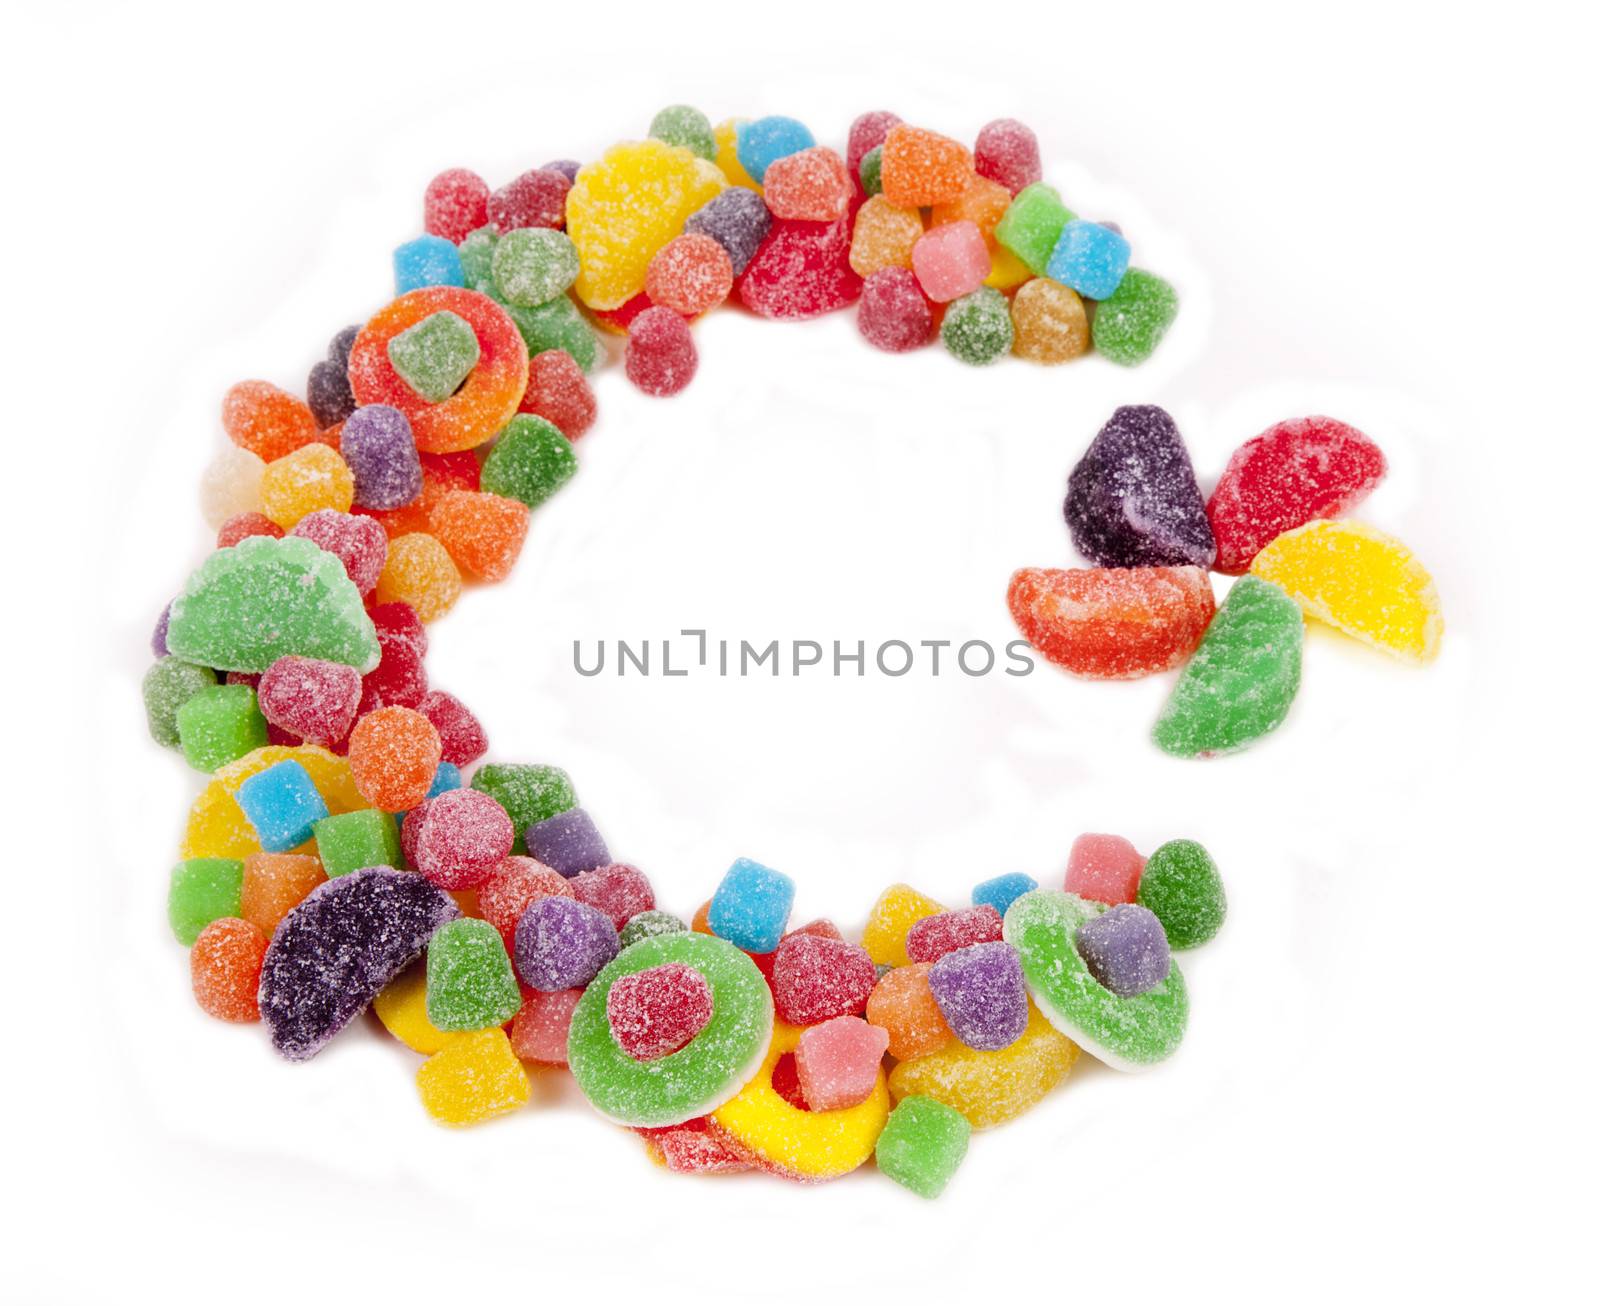 A color star and crescent moon made of candy against a white background.